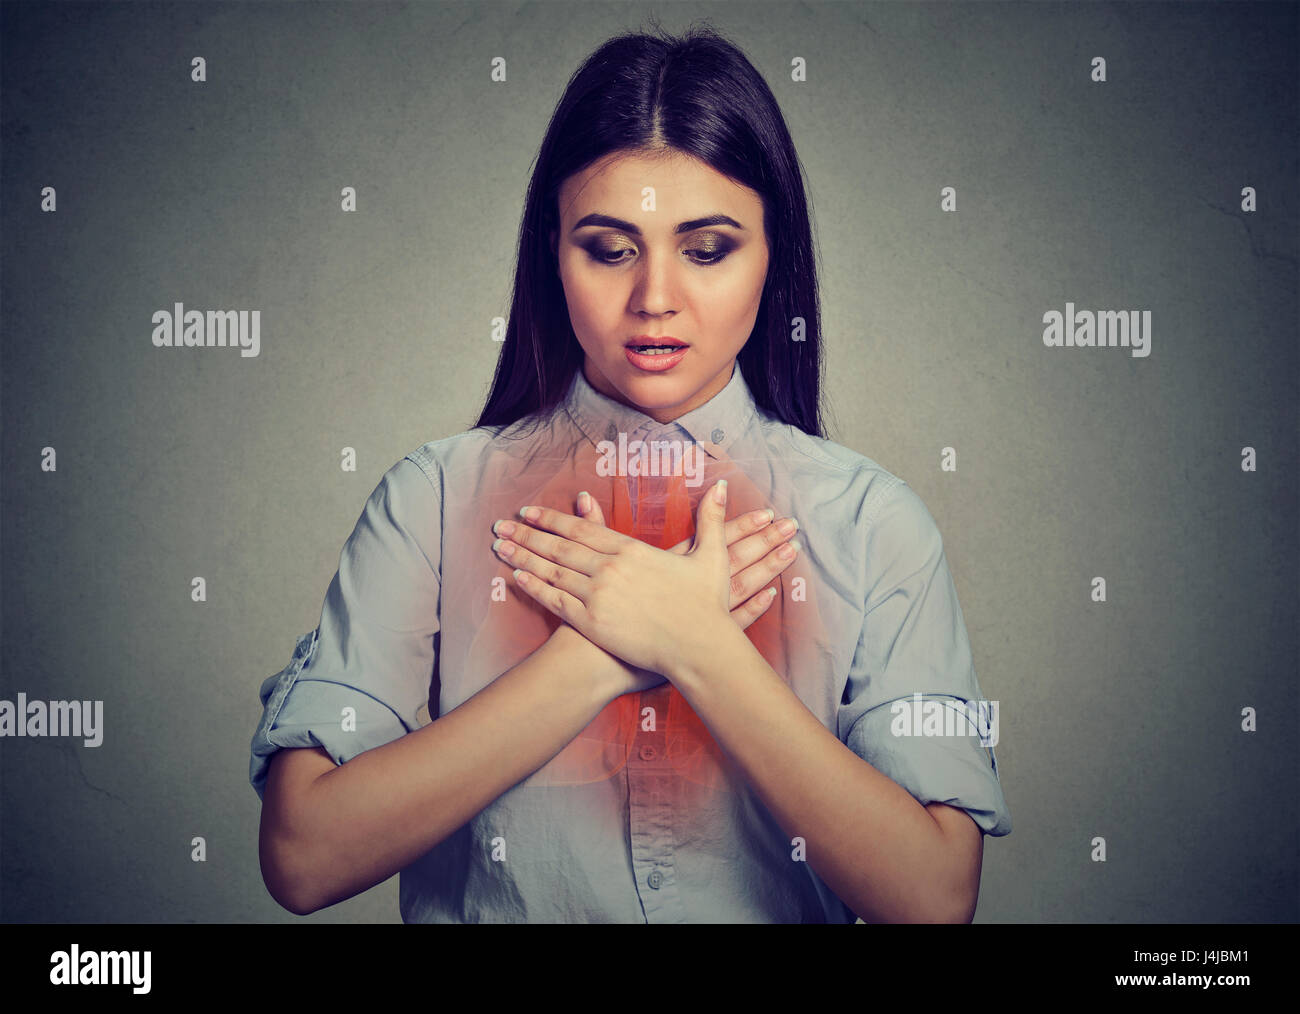 Young woman with asthma attack or respiratory problem isolated on gray background Stock Photo